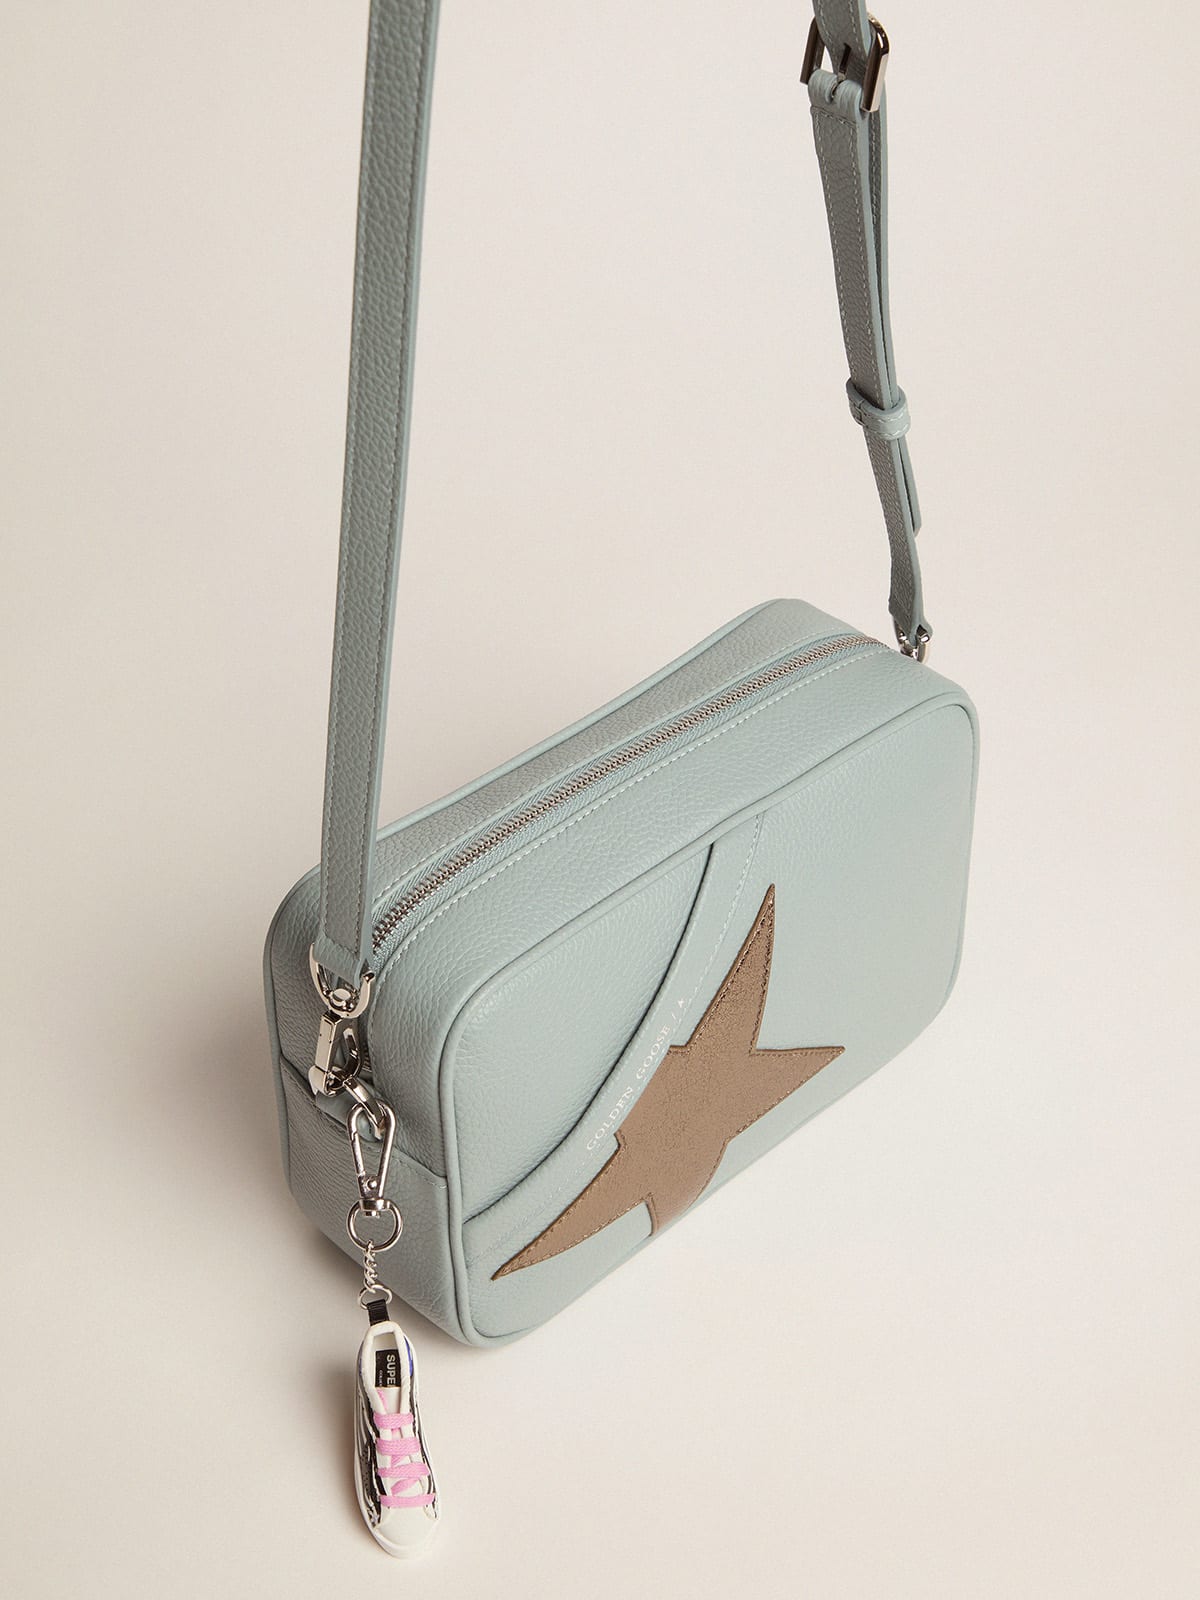 Golden Goose - Aquamarine Star Bag made of hammered leather with dark silver star in 